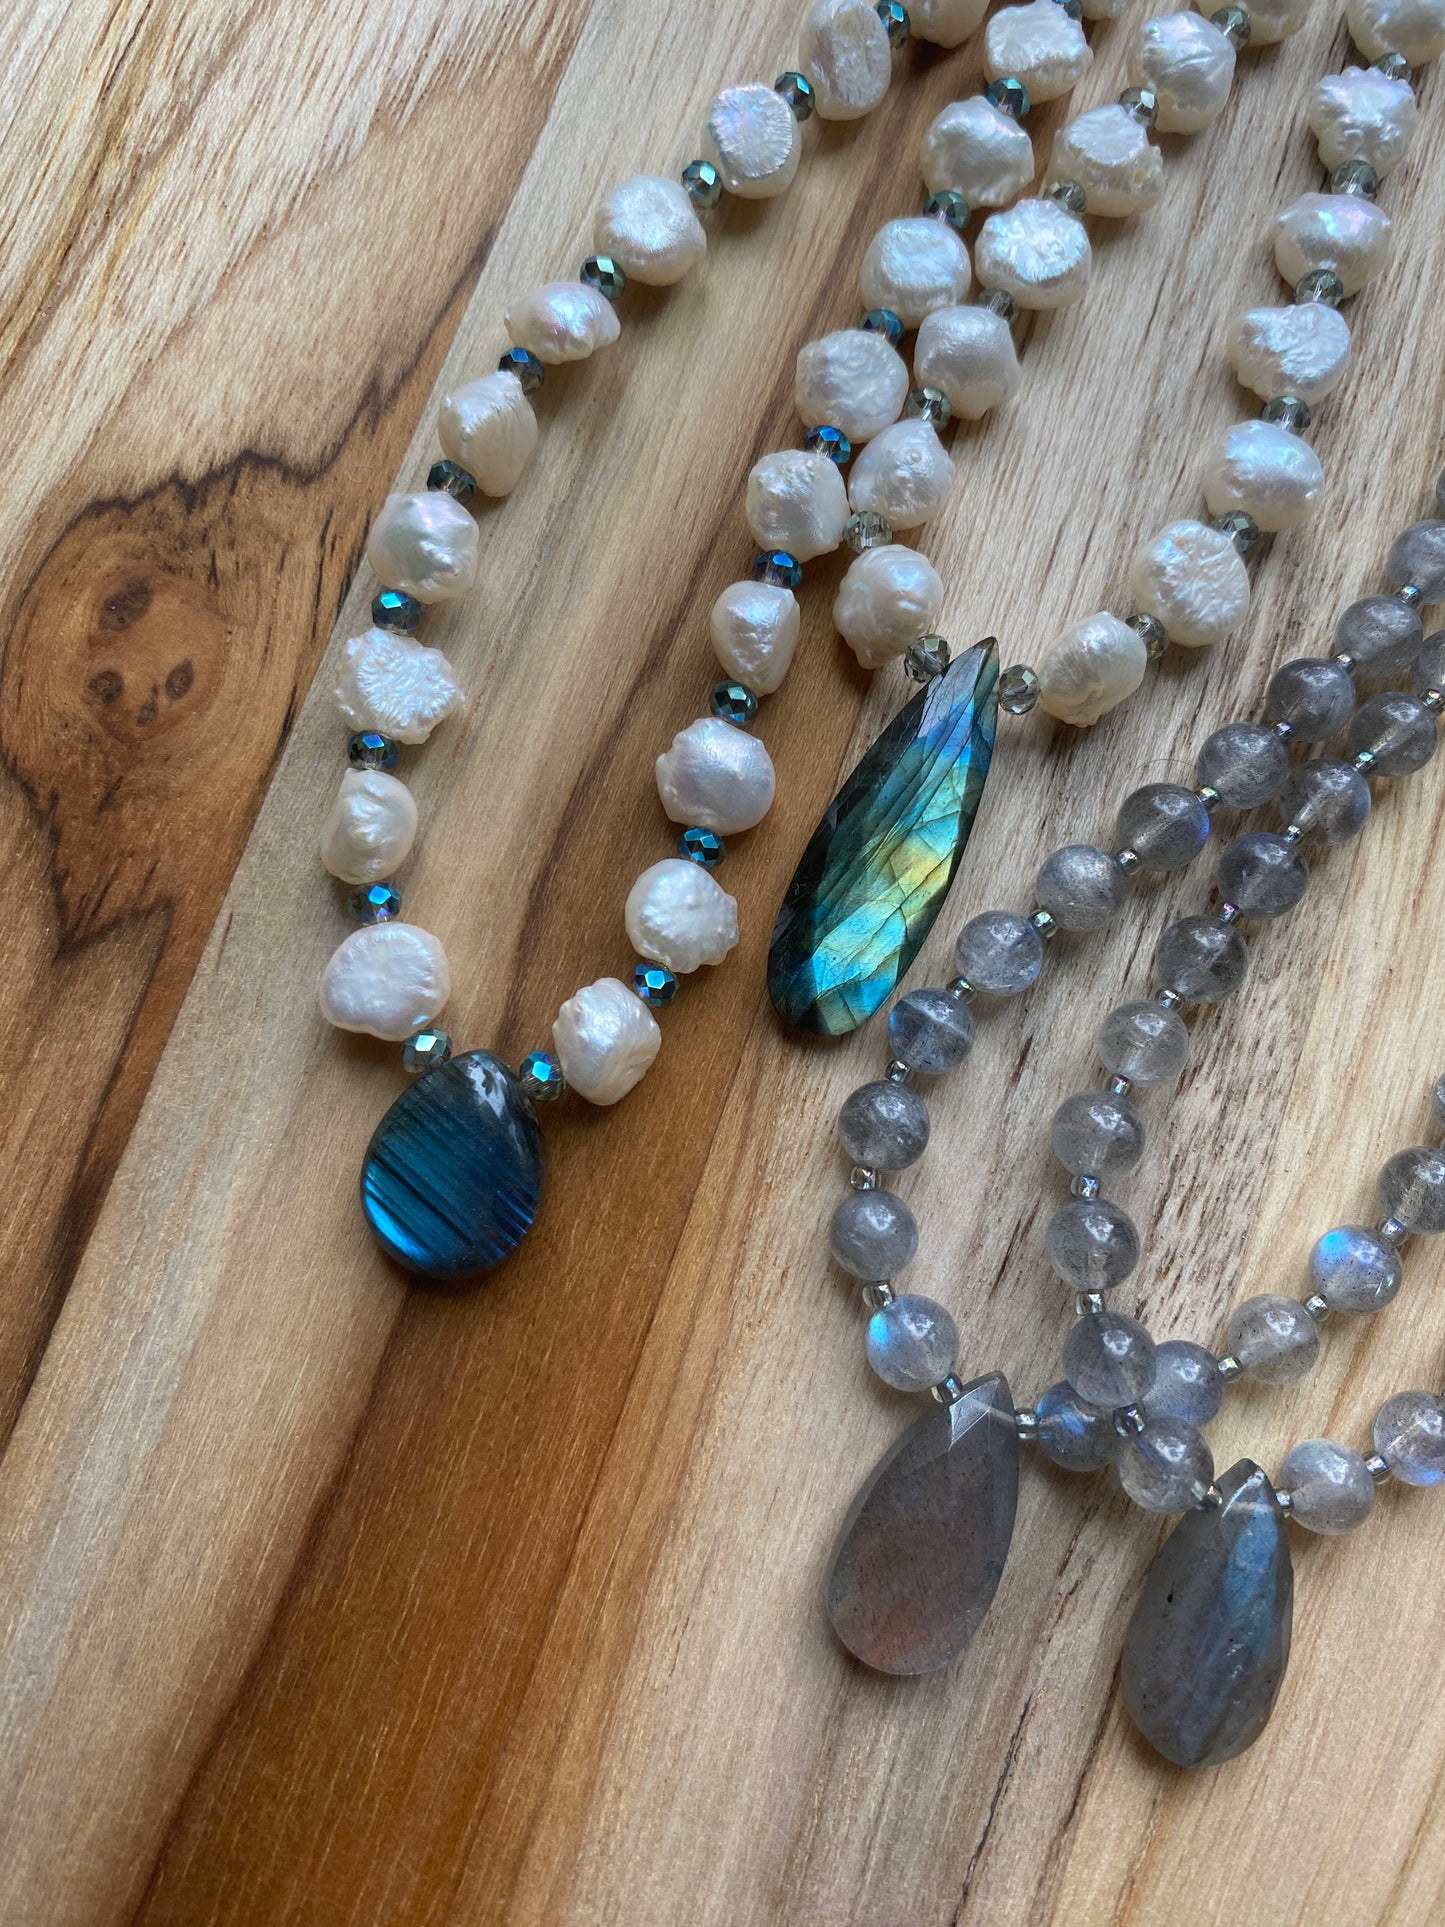 White Freshwater Pearl Beaded Necklace with Labradorite Pendant Bead and Crystals